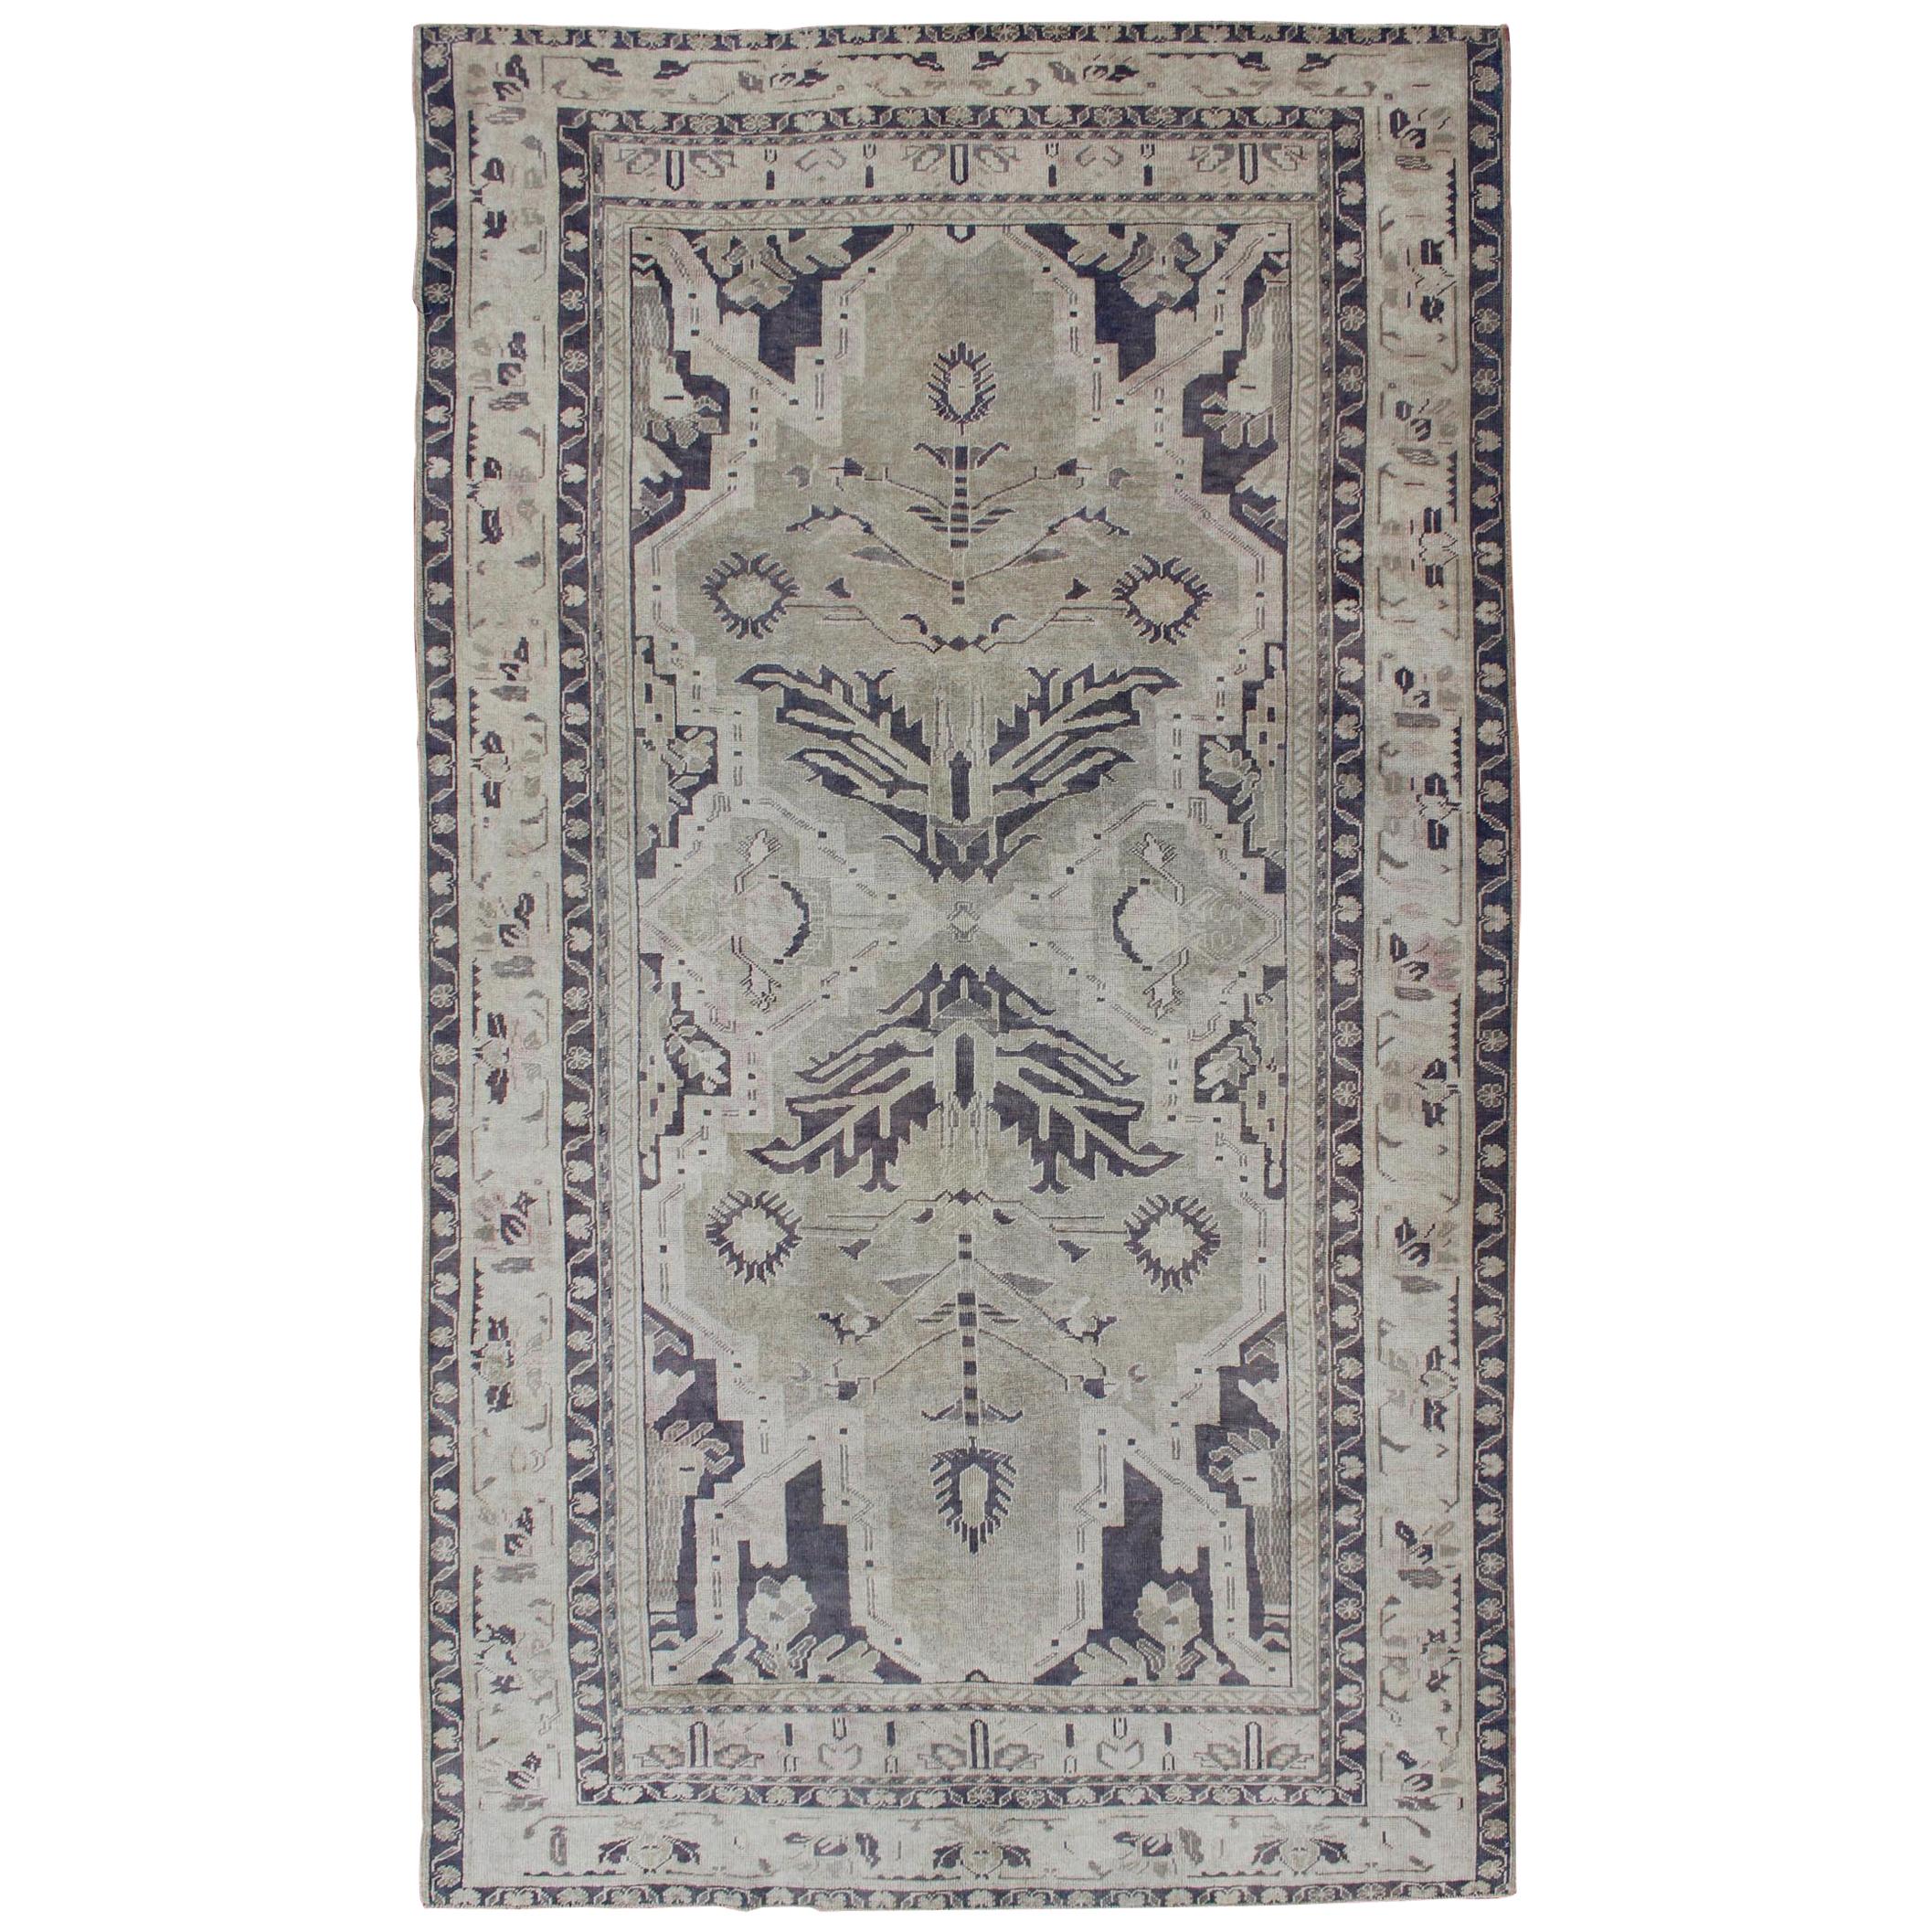 Vintage Turkish Oushak Rug with Dual Medallion Design in Dark Blue and Taupe